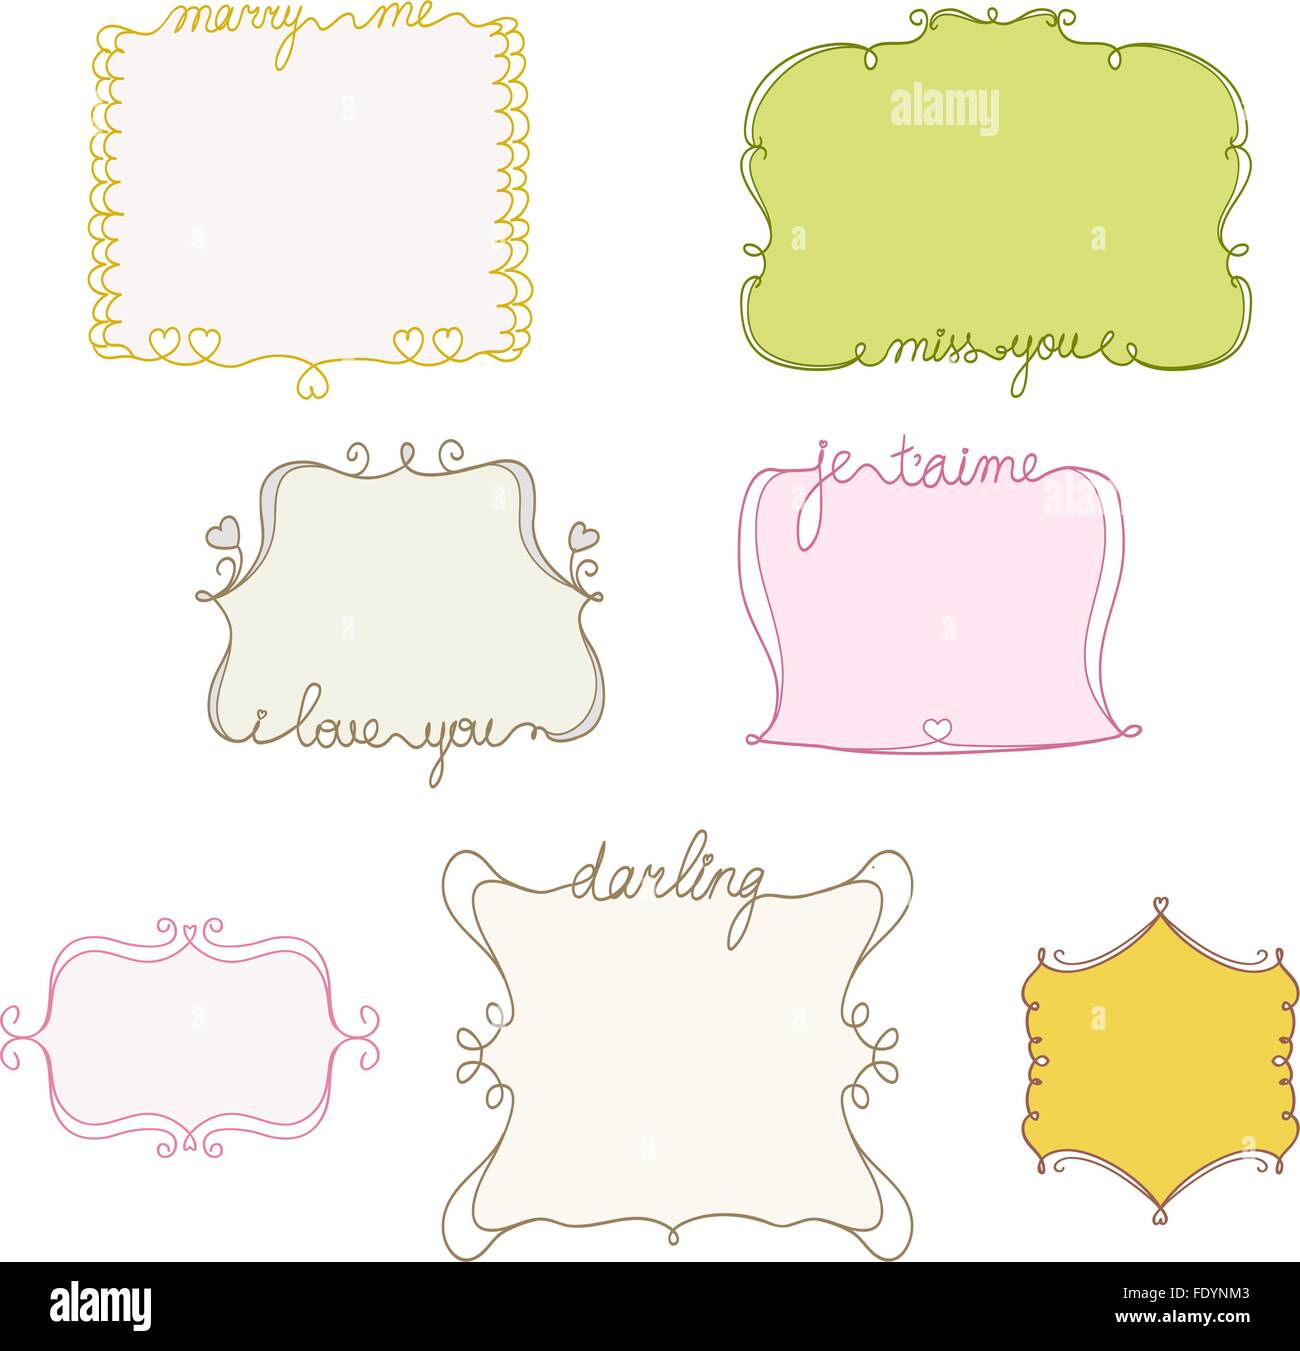 Frames hand drawn Stock Vector Images - Alamy